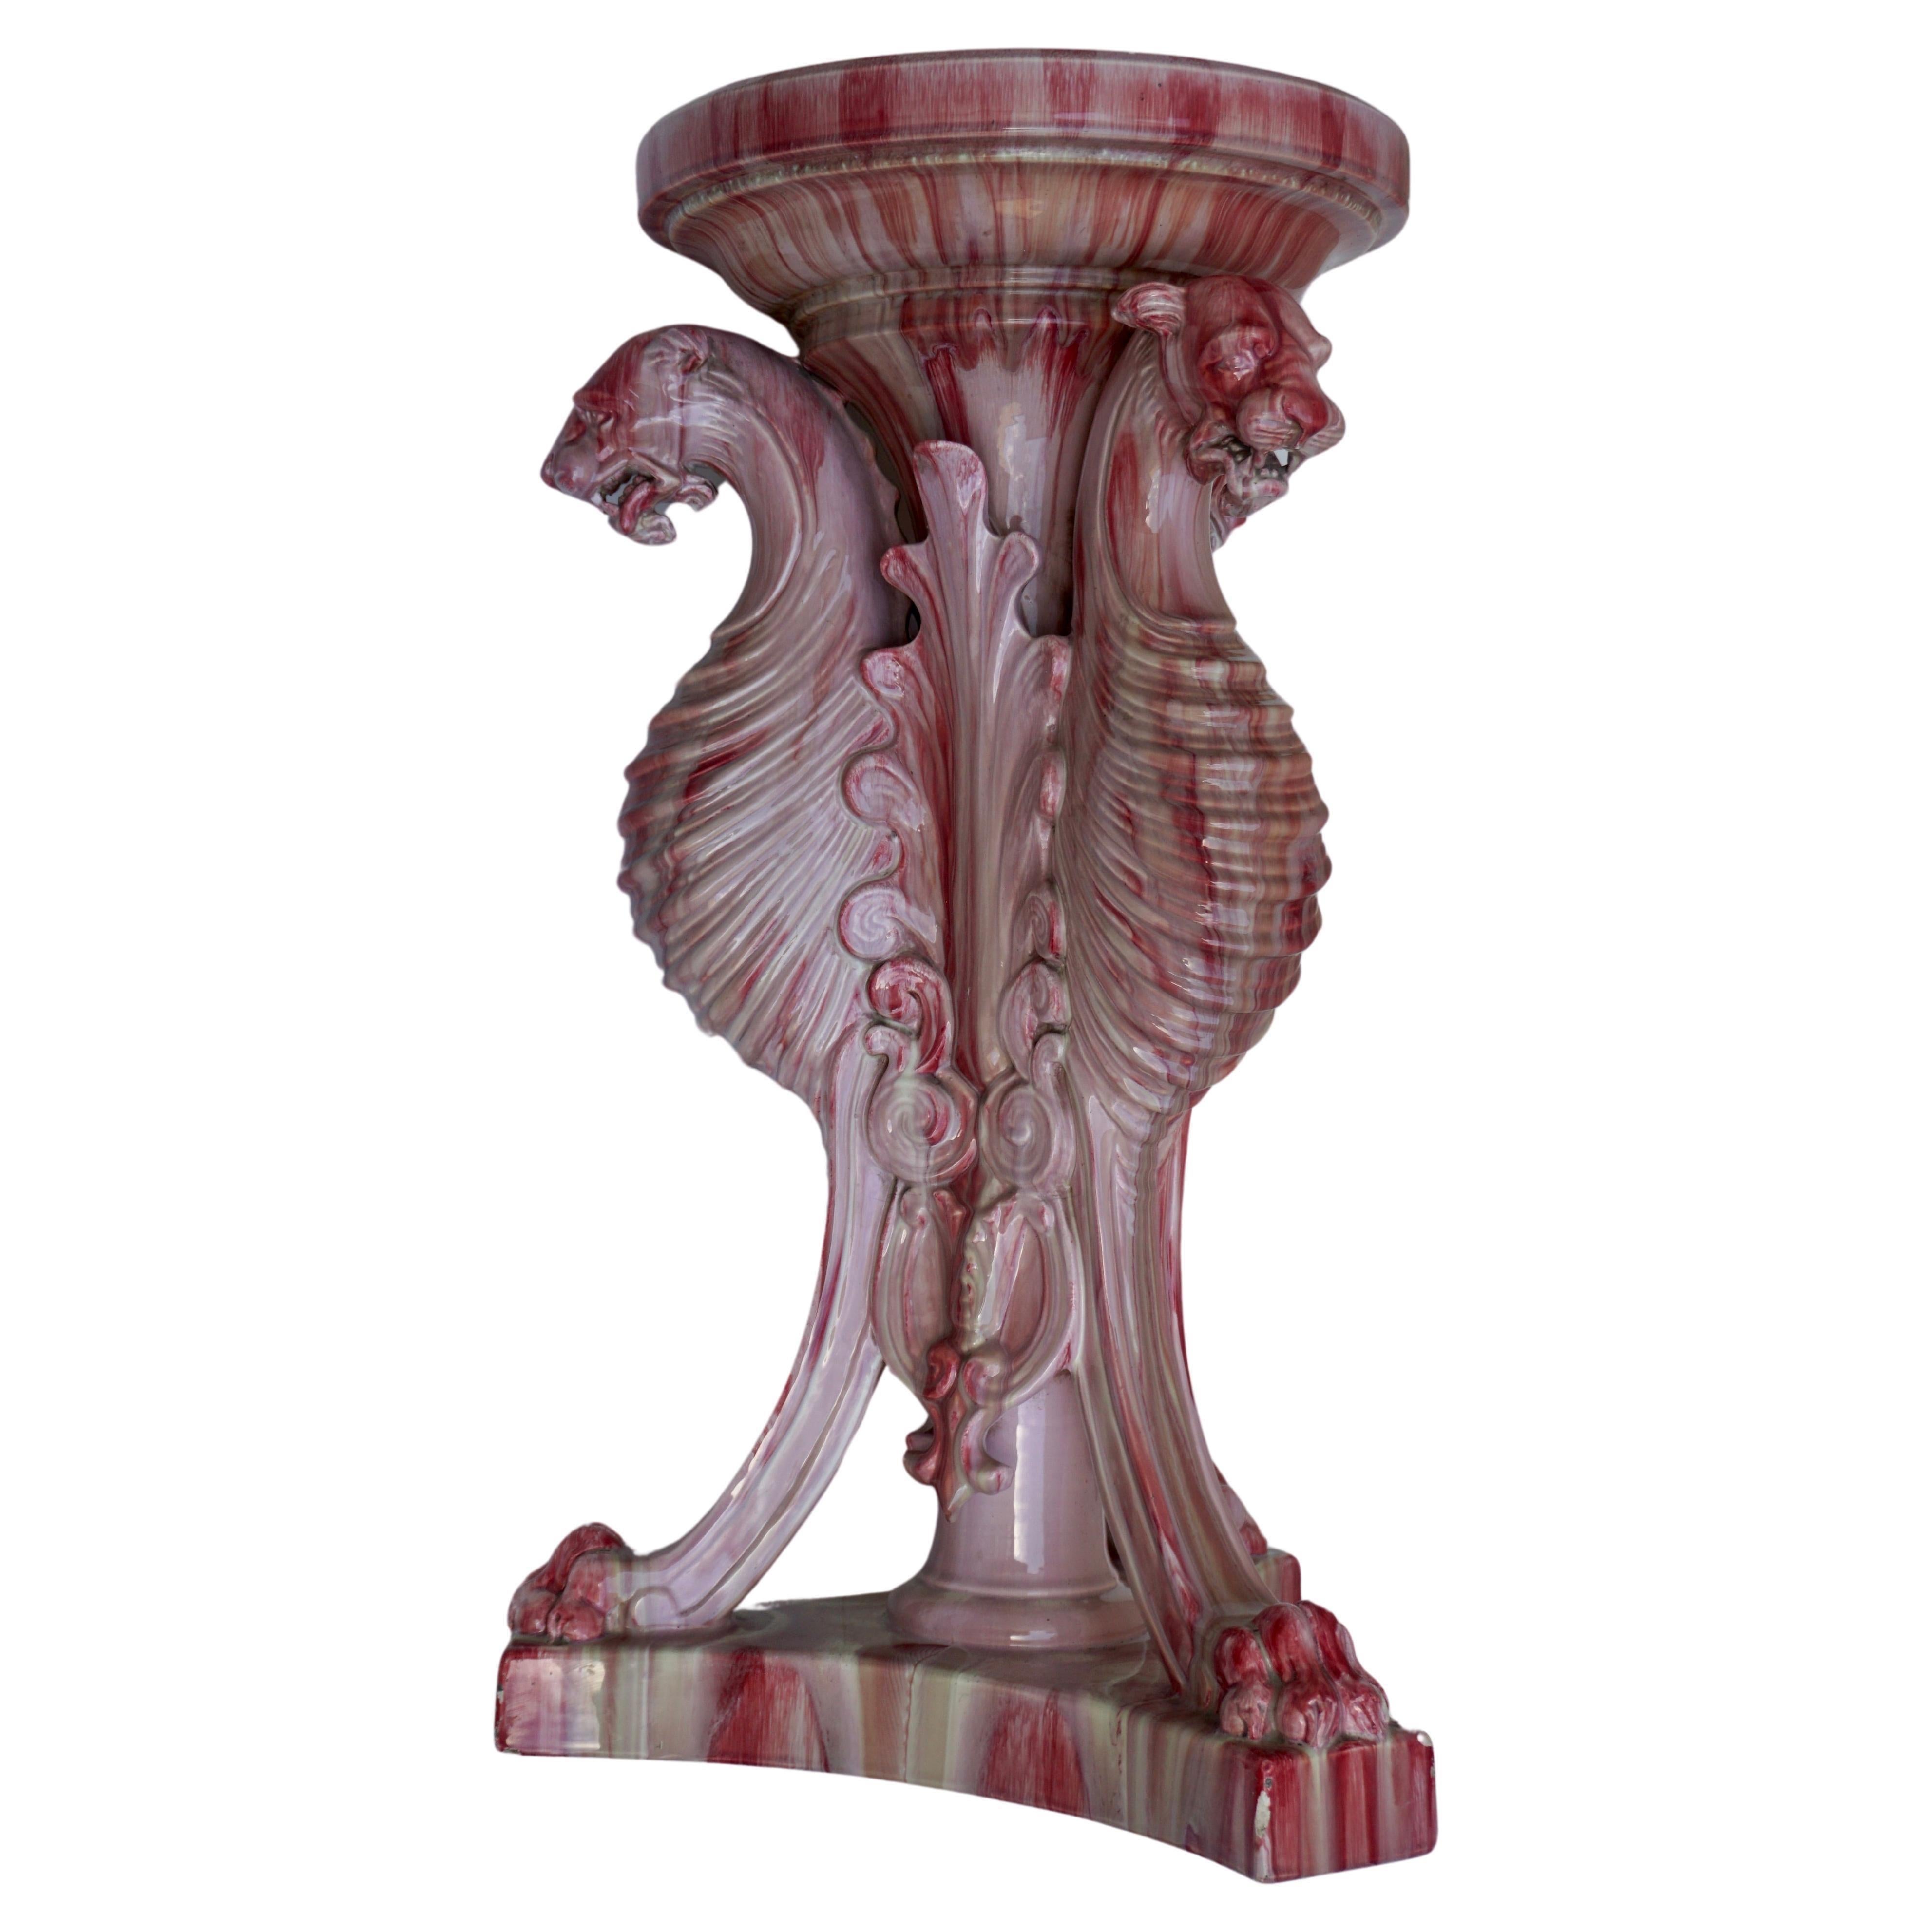 Vallauris Art Nouveau majolica column in the style of Jérôme Massier: circa 1900.

Weight 20 kg.